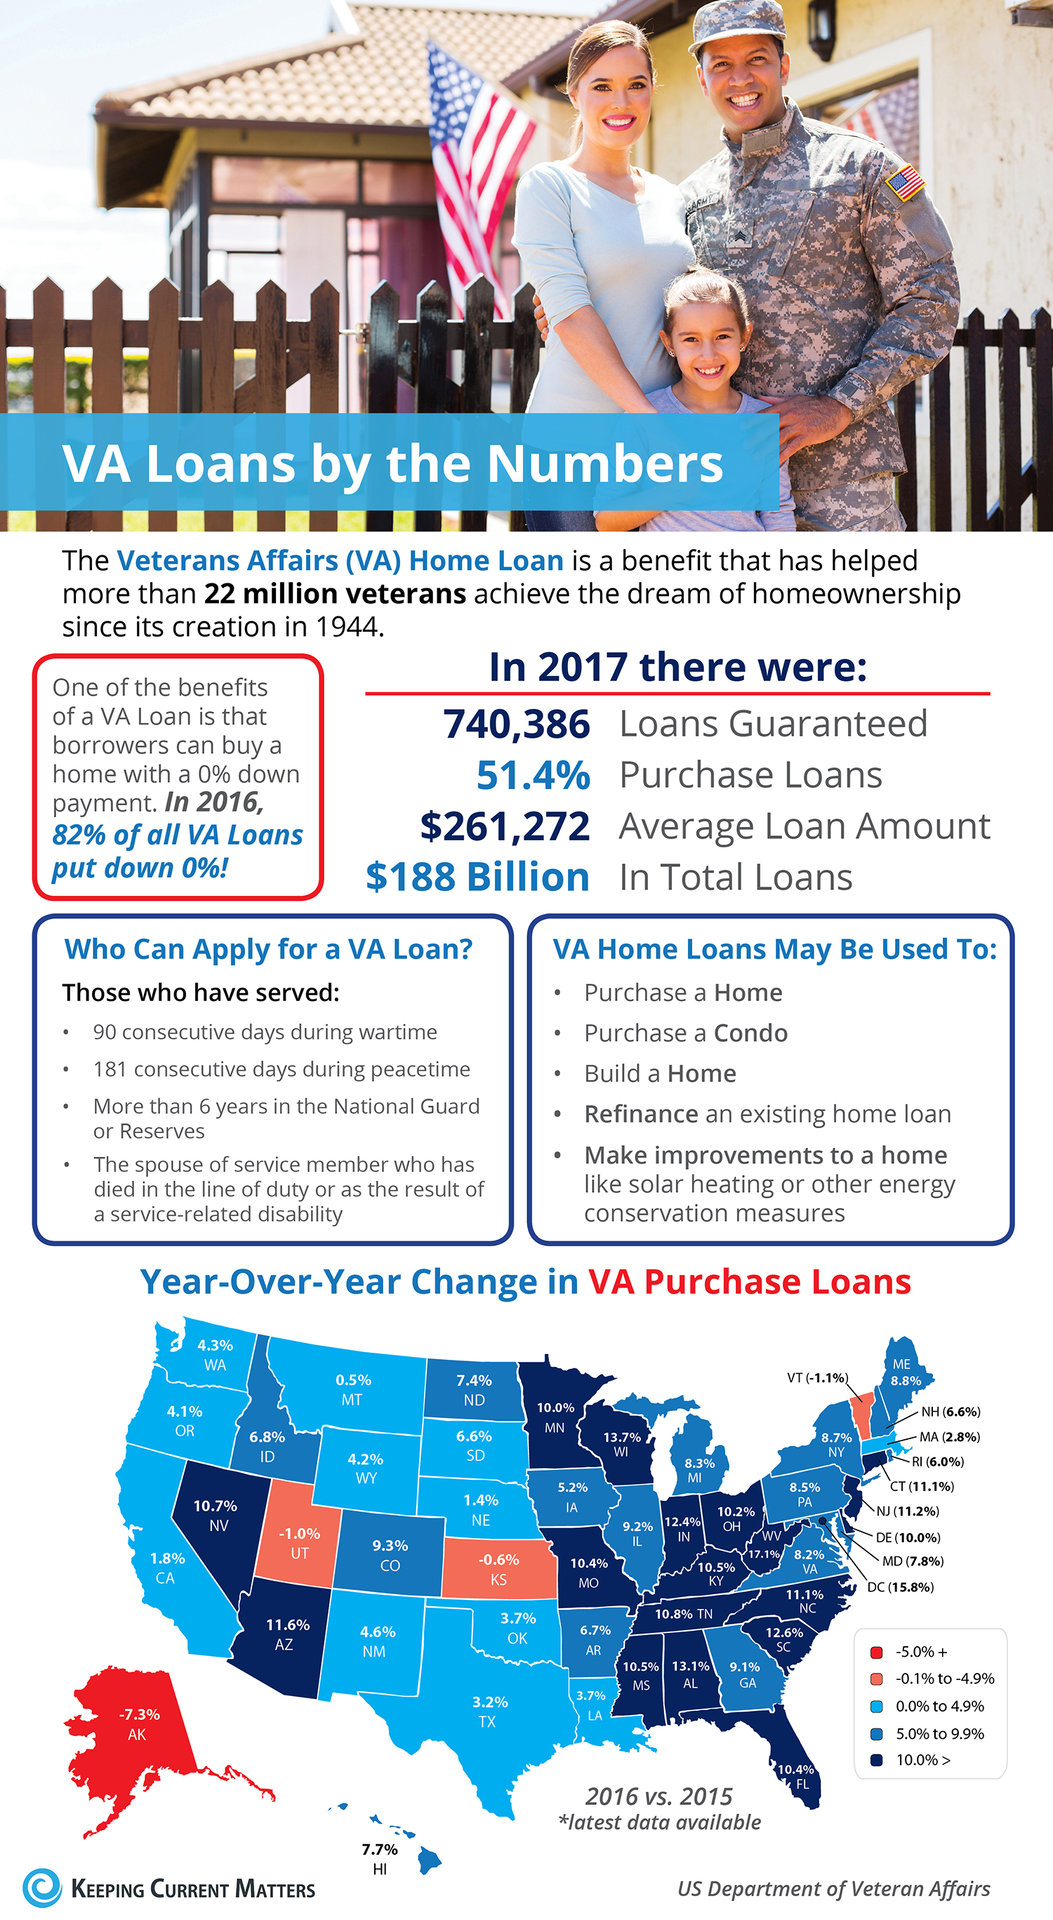 VA Loans by the Numbers [INFOGRAPHIC] | Keeping Current Matters